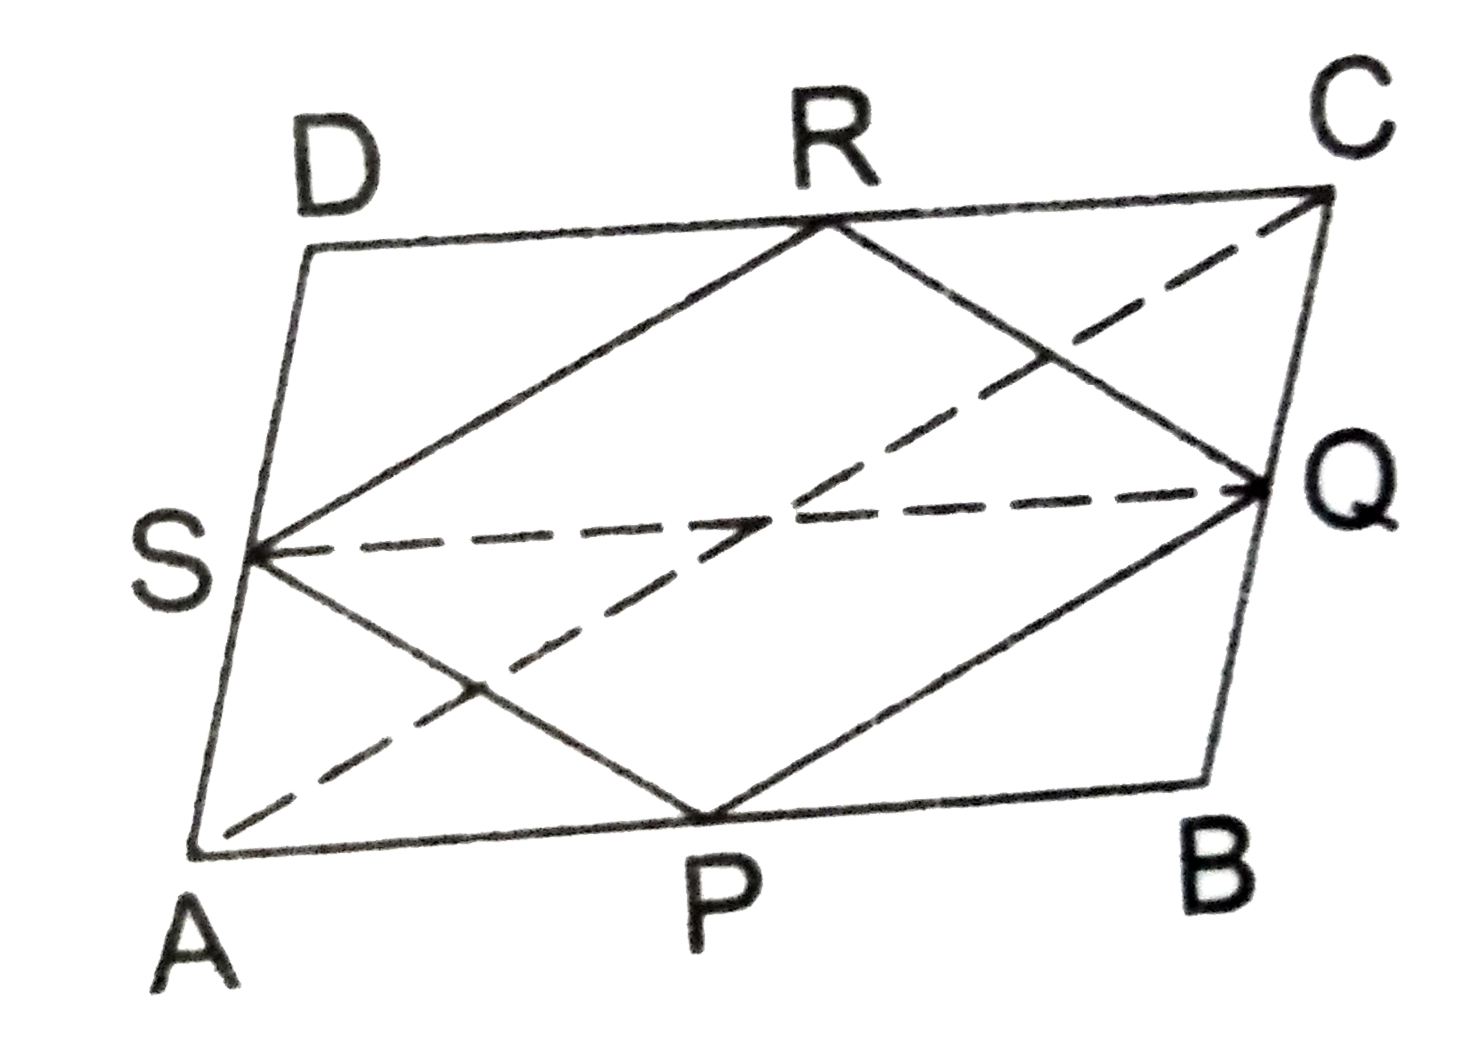 P, Q, R, S are respectively the midpoints of the sides AB, BC, CD and DA of ||gm ABCD. Show that PQRS is a parallelogram and also show that   ar(